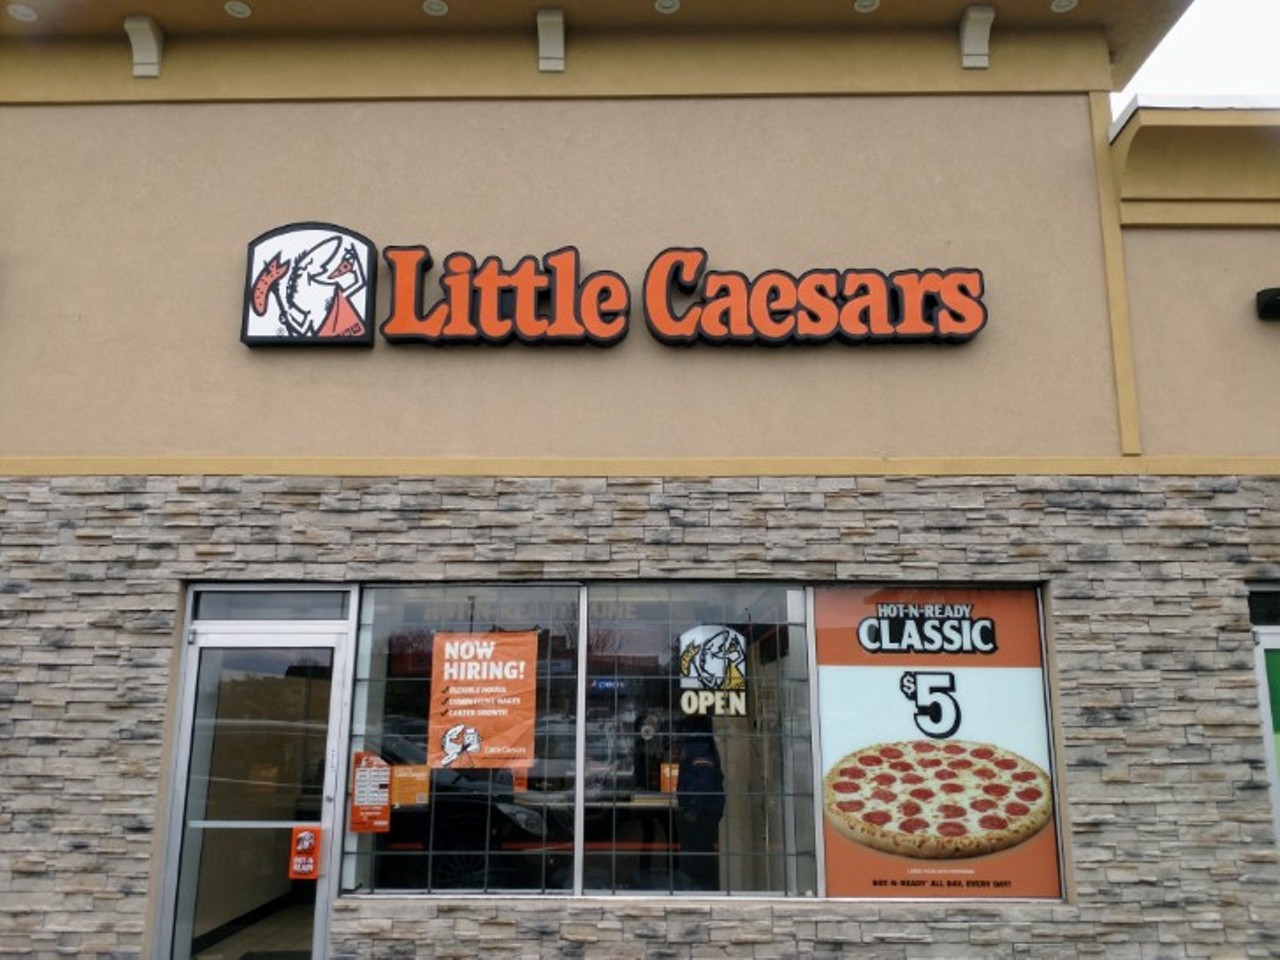 Little Caesar&#146;s Pizza
Multiple Detroit locations
Little Caesars may be one of the largest carry-out pizza chains in the country but it started from humble beginnings in Garden City. If you&#146;re sick to death of $5 Hot-N-Readys, try something new like a bacon-wrapped deep dish pizza or a pretzel crust pizza.
Photo by Angela Zielinski